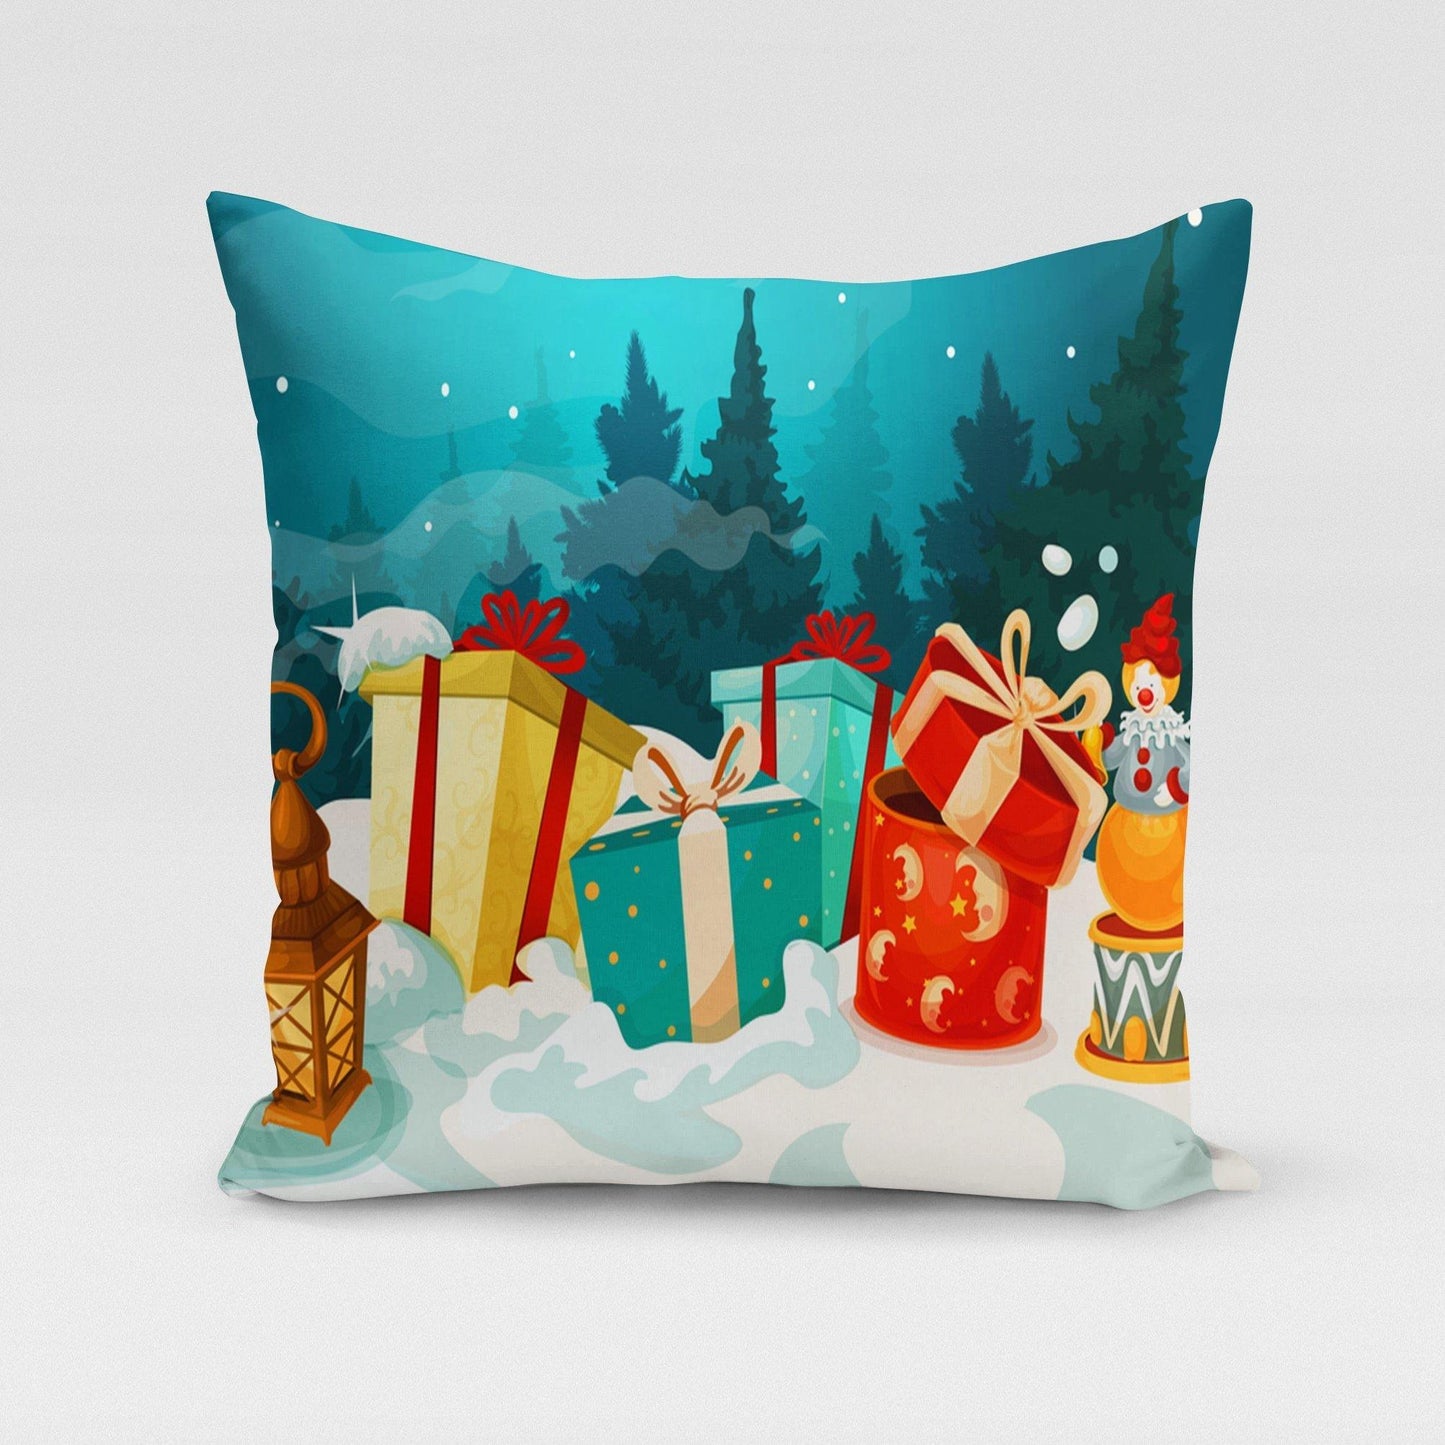 Giving Gifts Pillow Cover